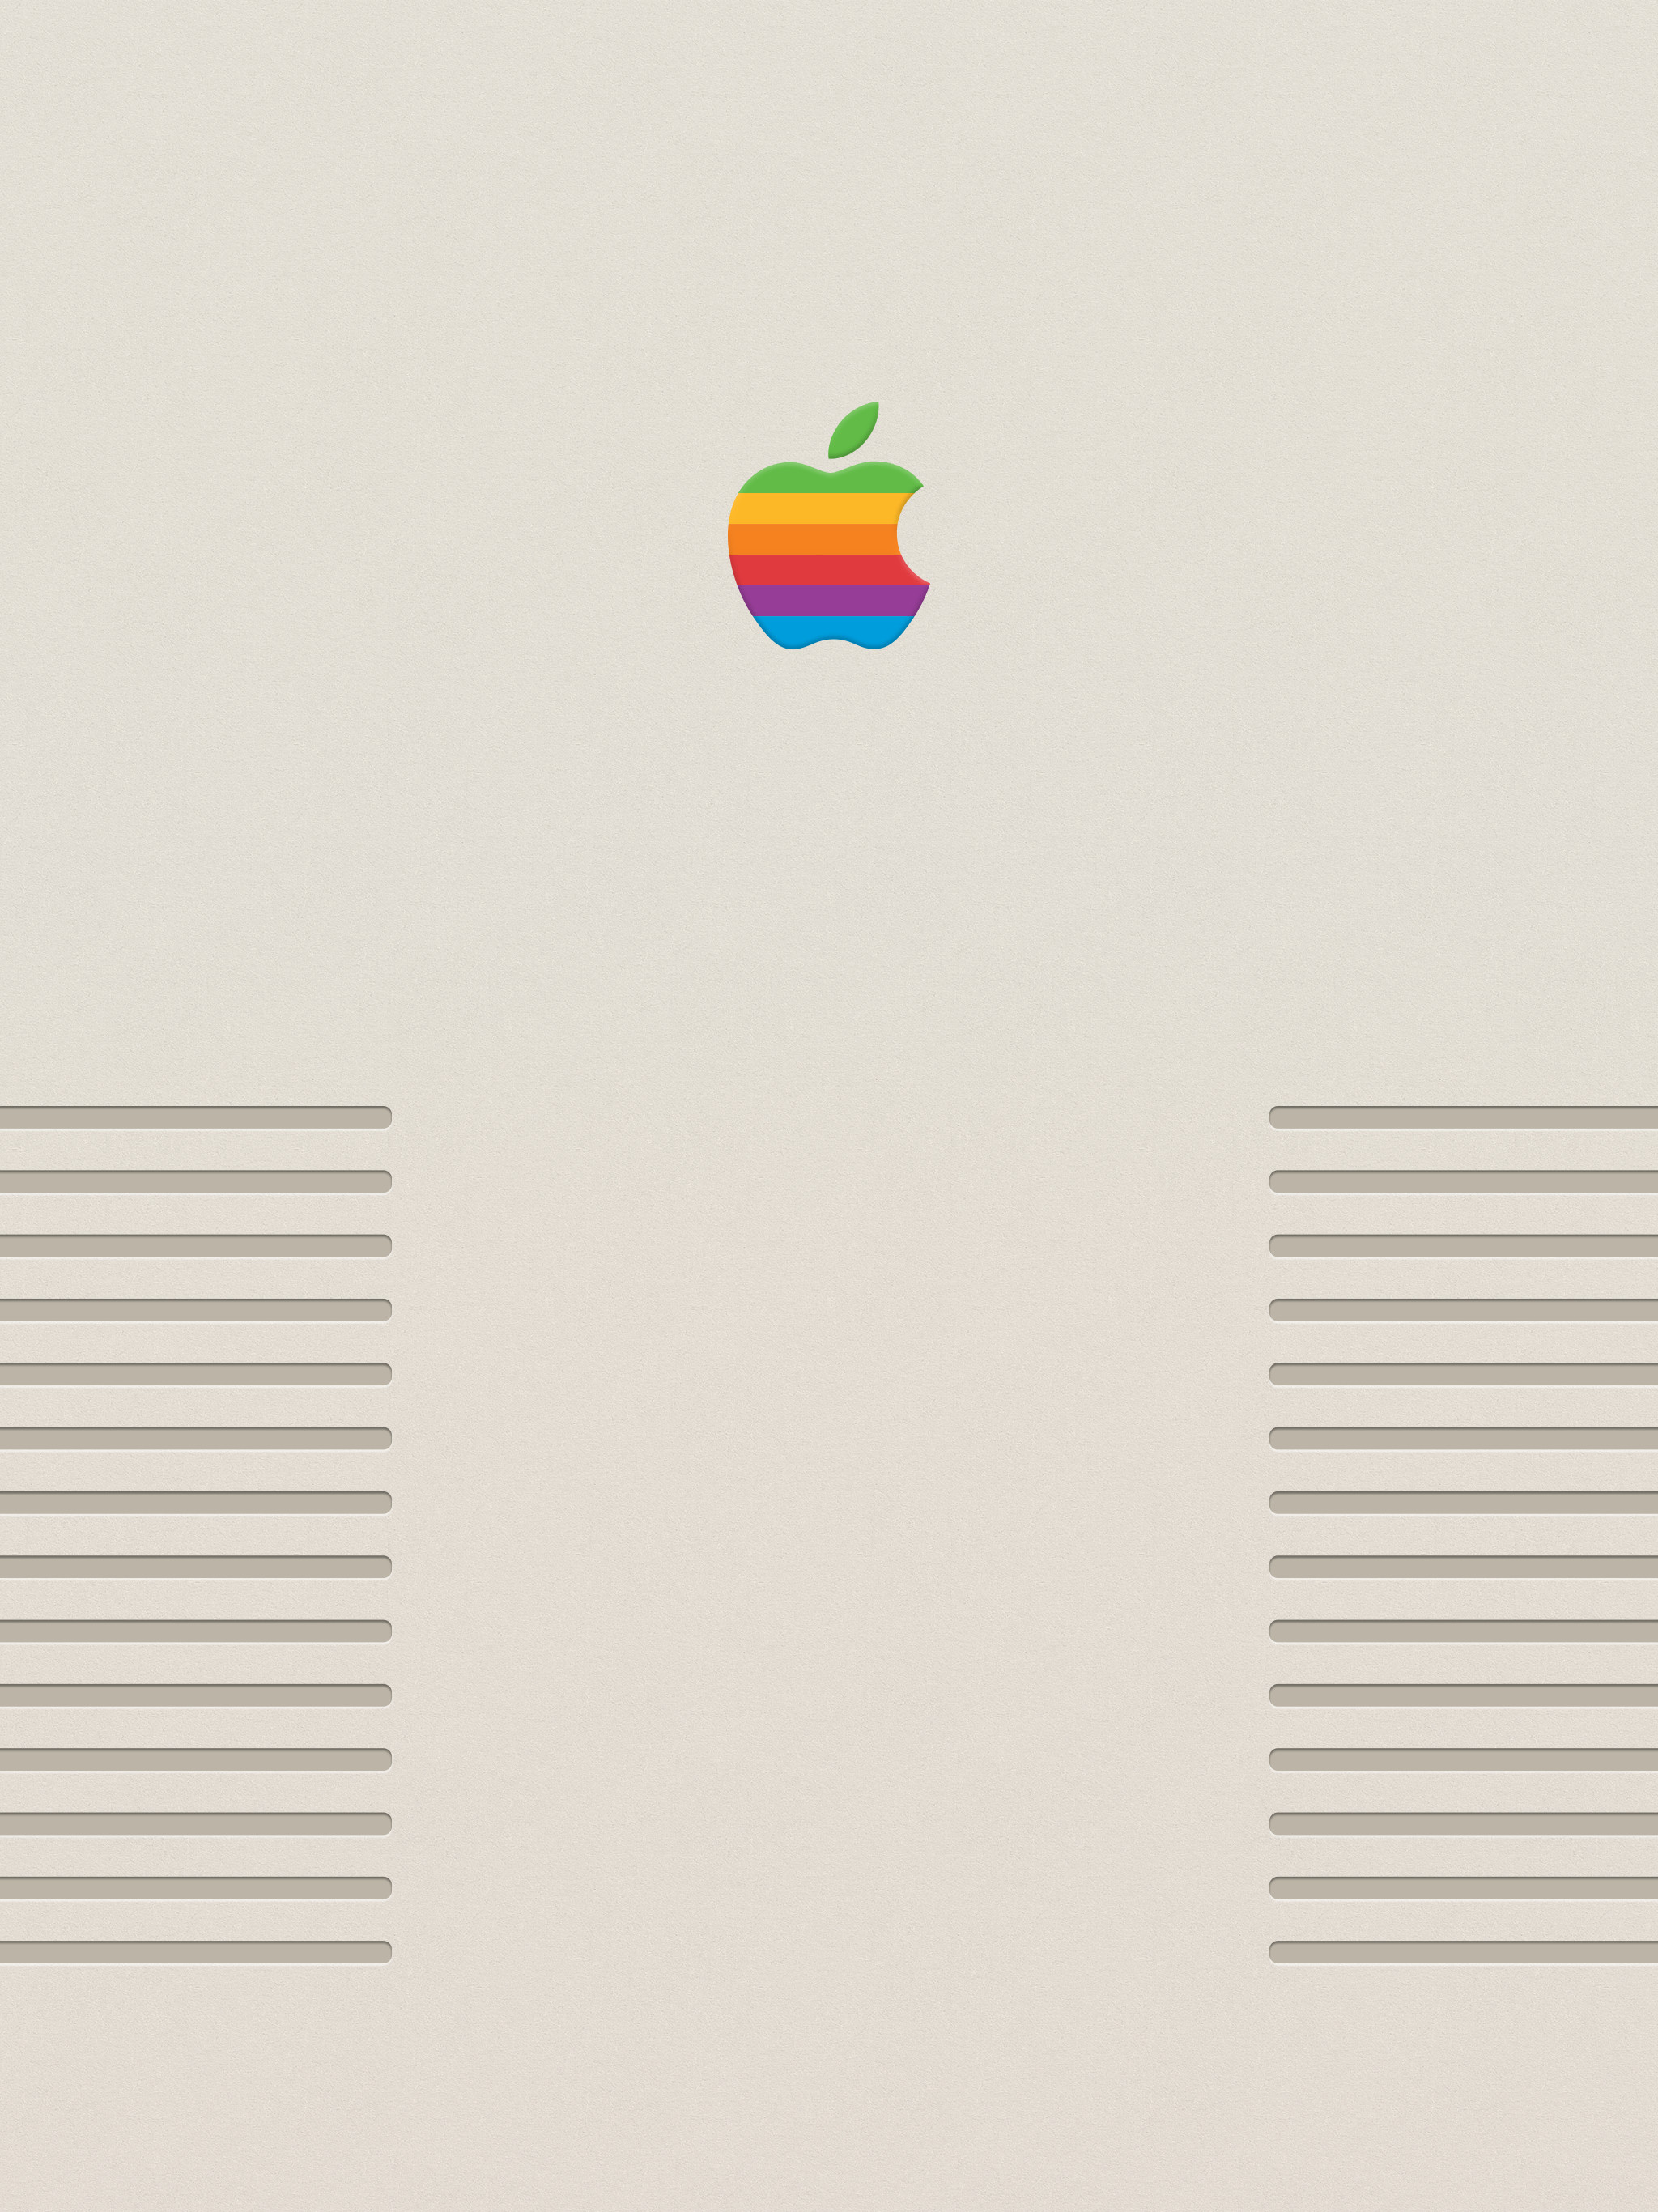 2048x2732 Wallpaper Weekends: Retro Apple for iPhone, iPad, Mac, and Apple Watch